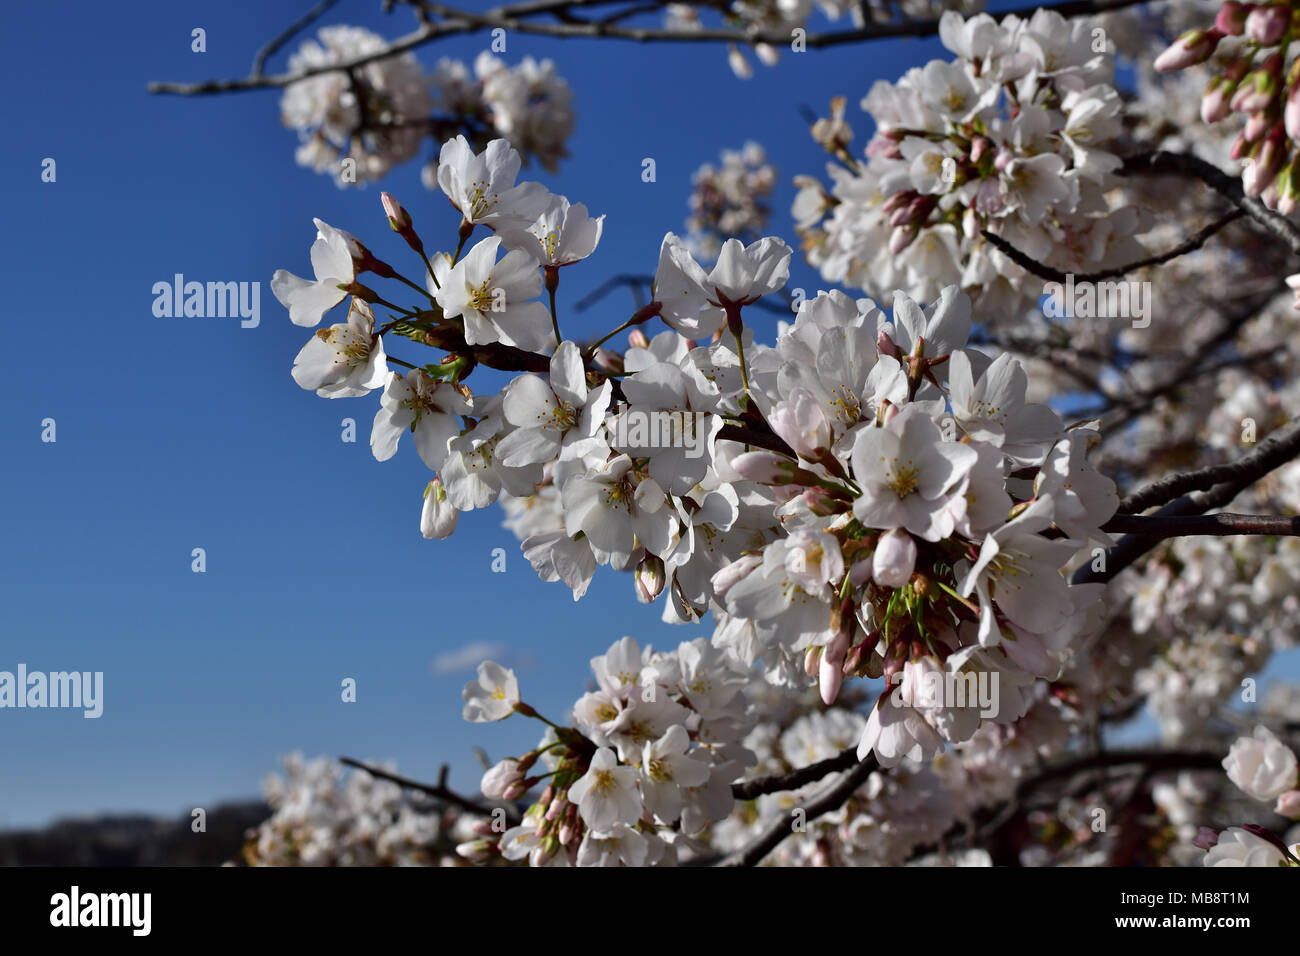 Spring in the air, Cherry Blossom Festival, Washington DC Stock Photo